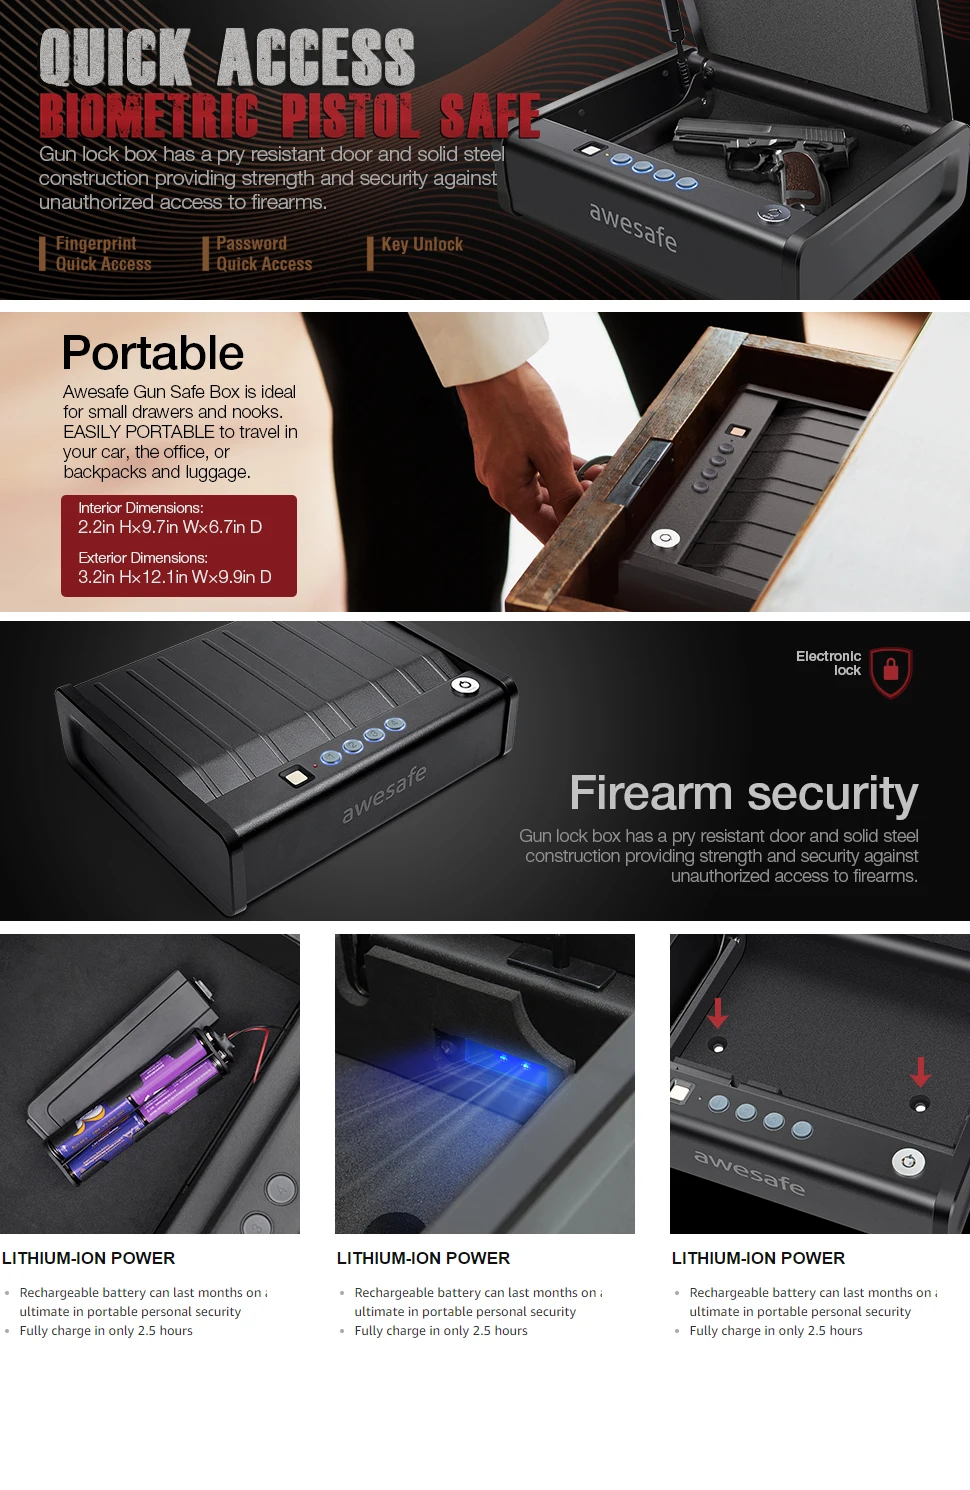 Details about   OPEN BOX awesafe Gun Safe with Fingerprint Identification and Biometric Lock 